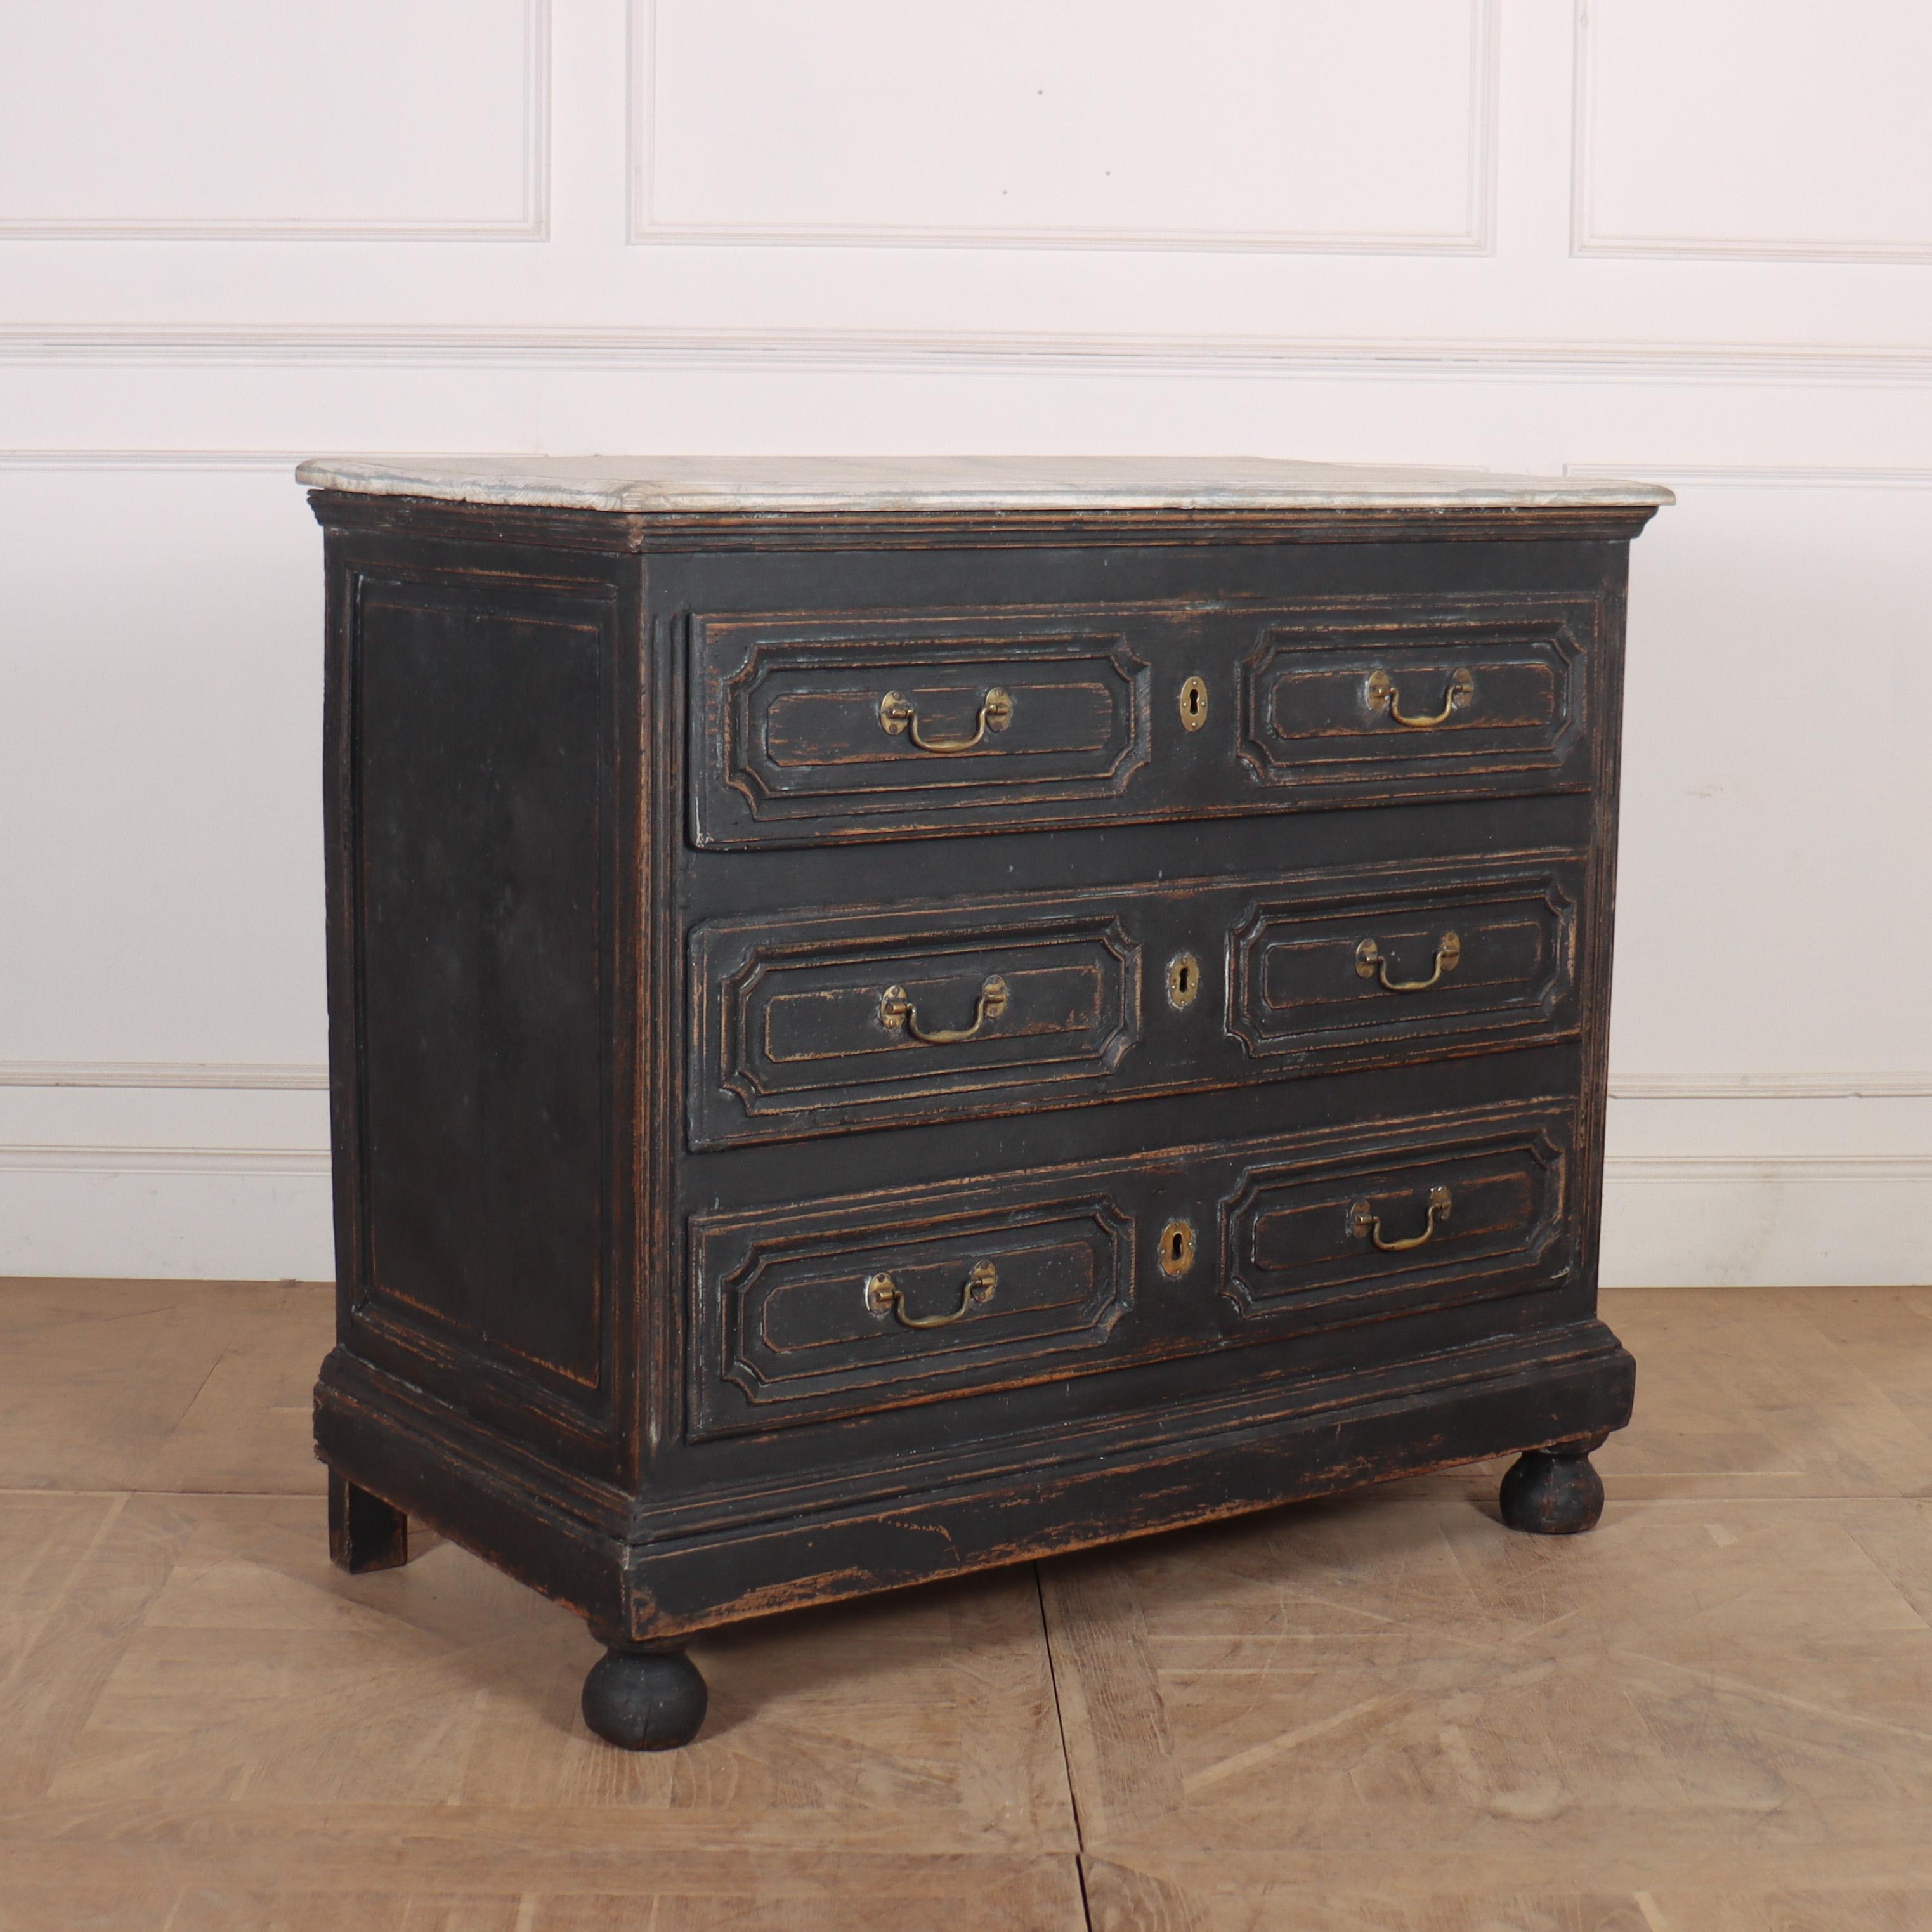 18th C French painted oak commode with a faux marble top. 1790.

Reference: 8039

Dimensions
46 inches (117 cms) Wide
24.5 inches (62 cms) Deep
42 inches (107 cms) High